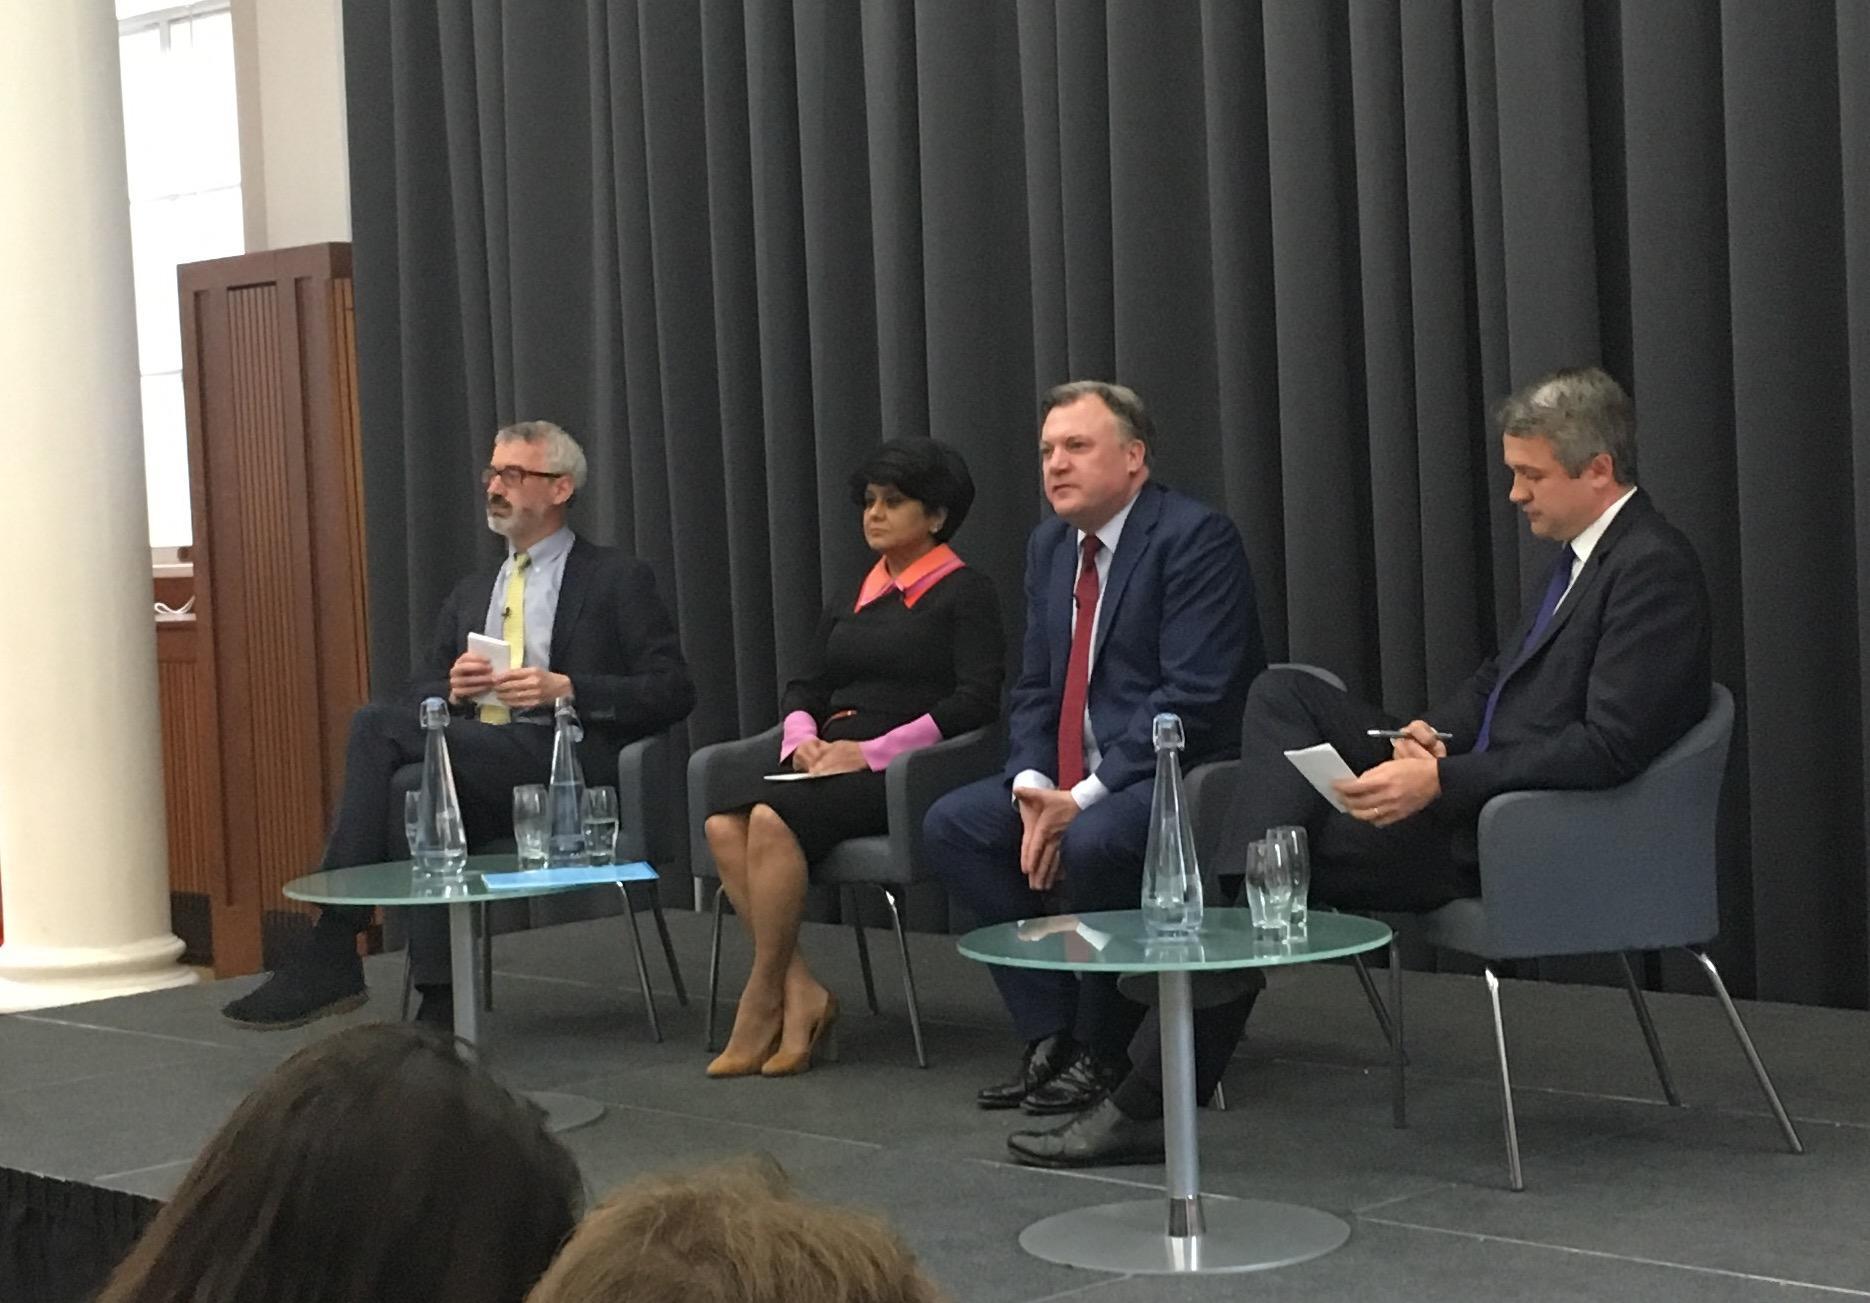 Lord Macpherson, Baroness Vadera, Ed Balls and Rupert Harrison at King’s College London yesterday